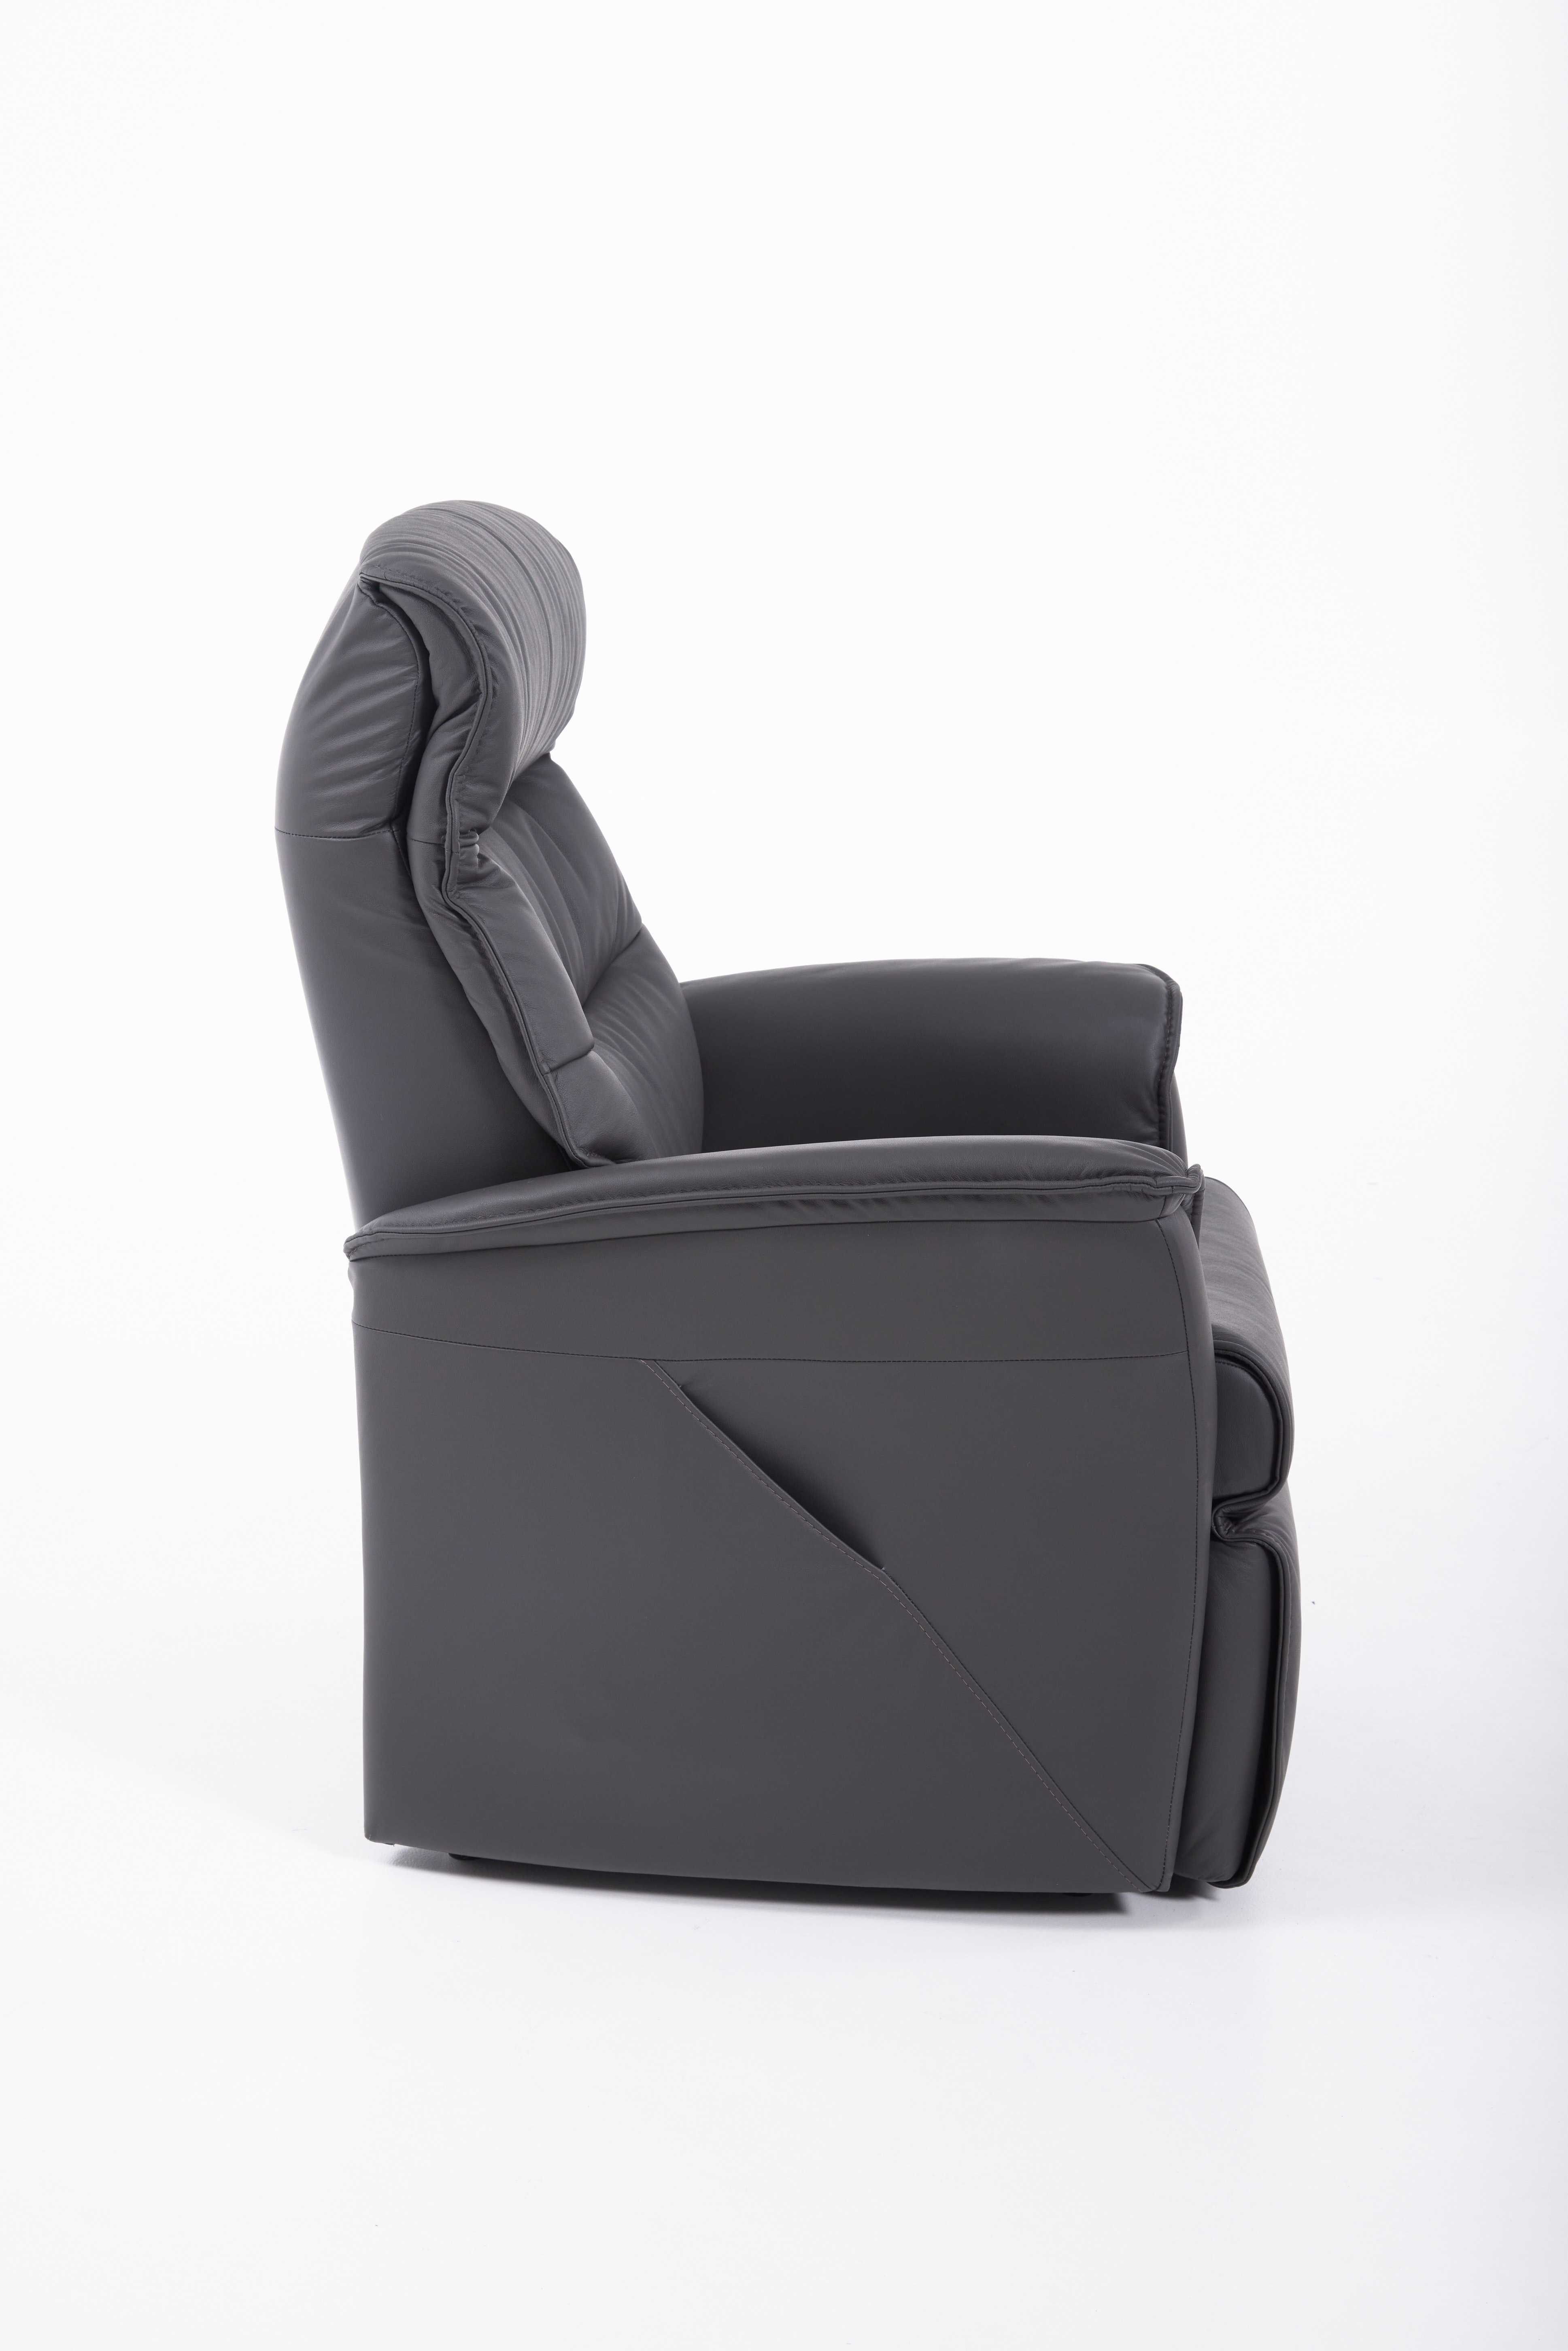 Nordic Spirit Paramount Rise and Recline Chair Graphite